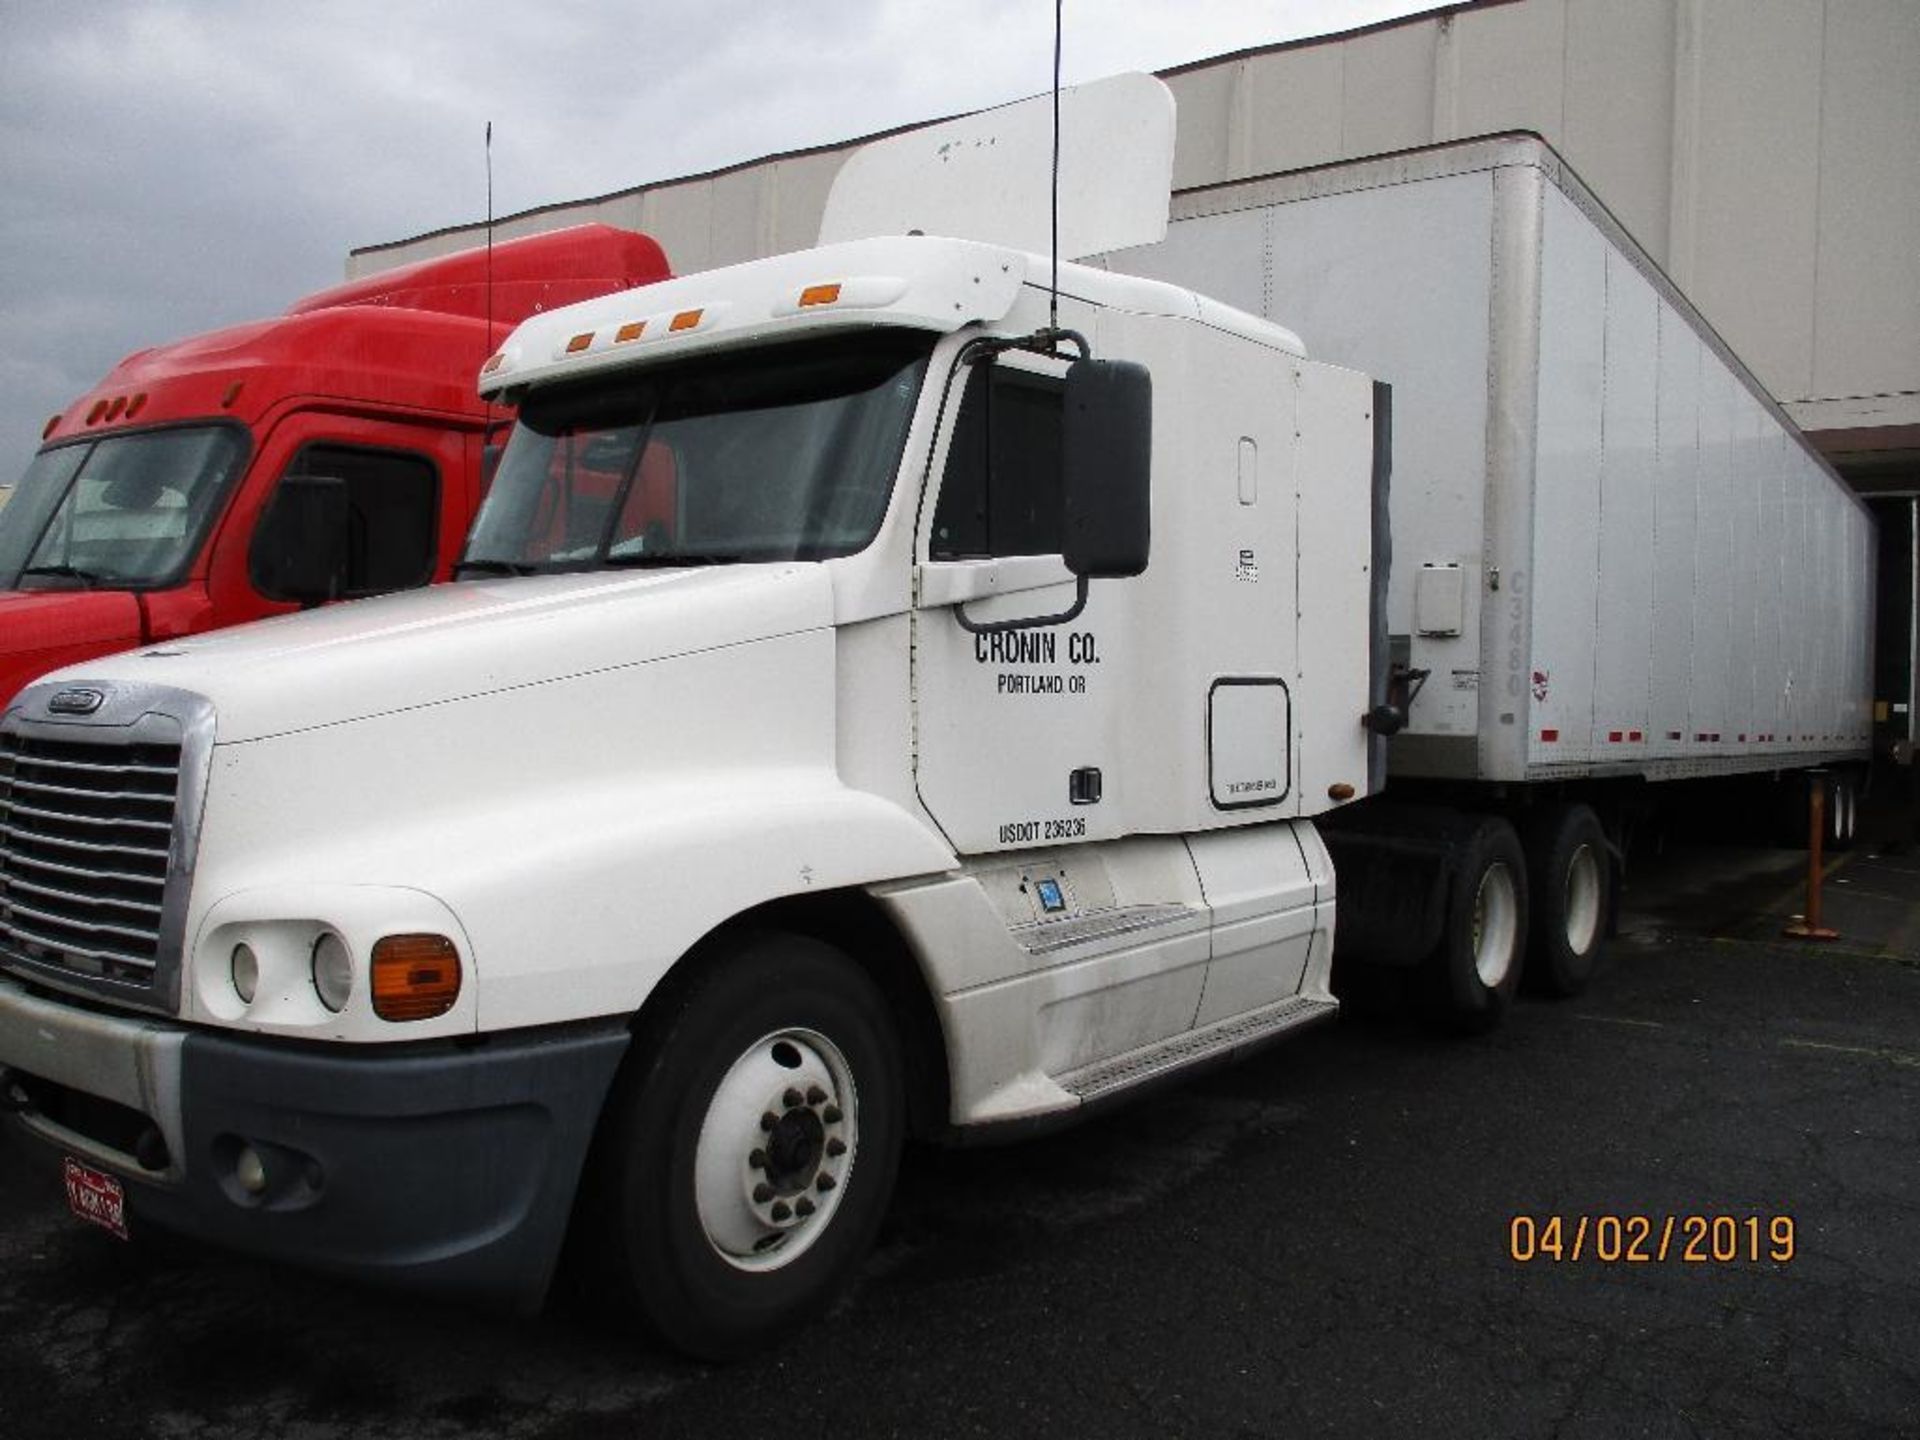 2004 Freightliner Tractor, GVWR 52,000lb, 814,523 Miles, VIN #1FUJBBCK45PU91882 - Image 2 of 10